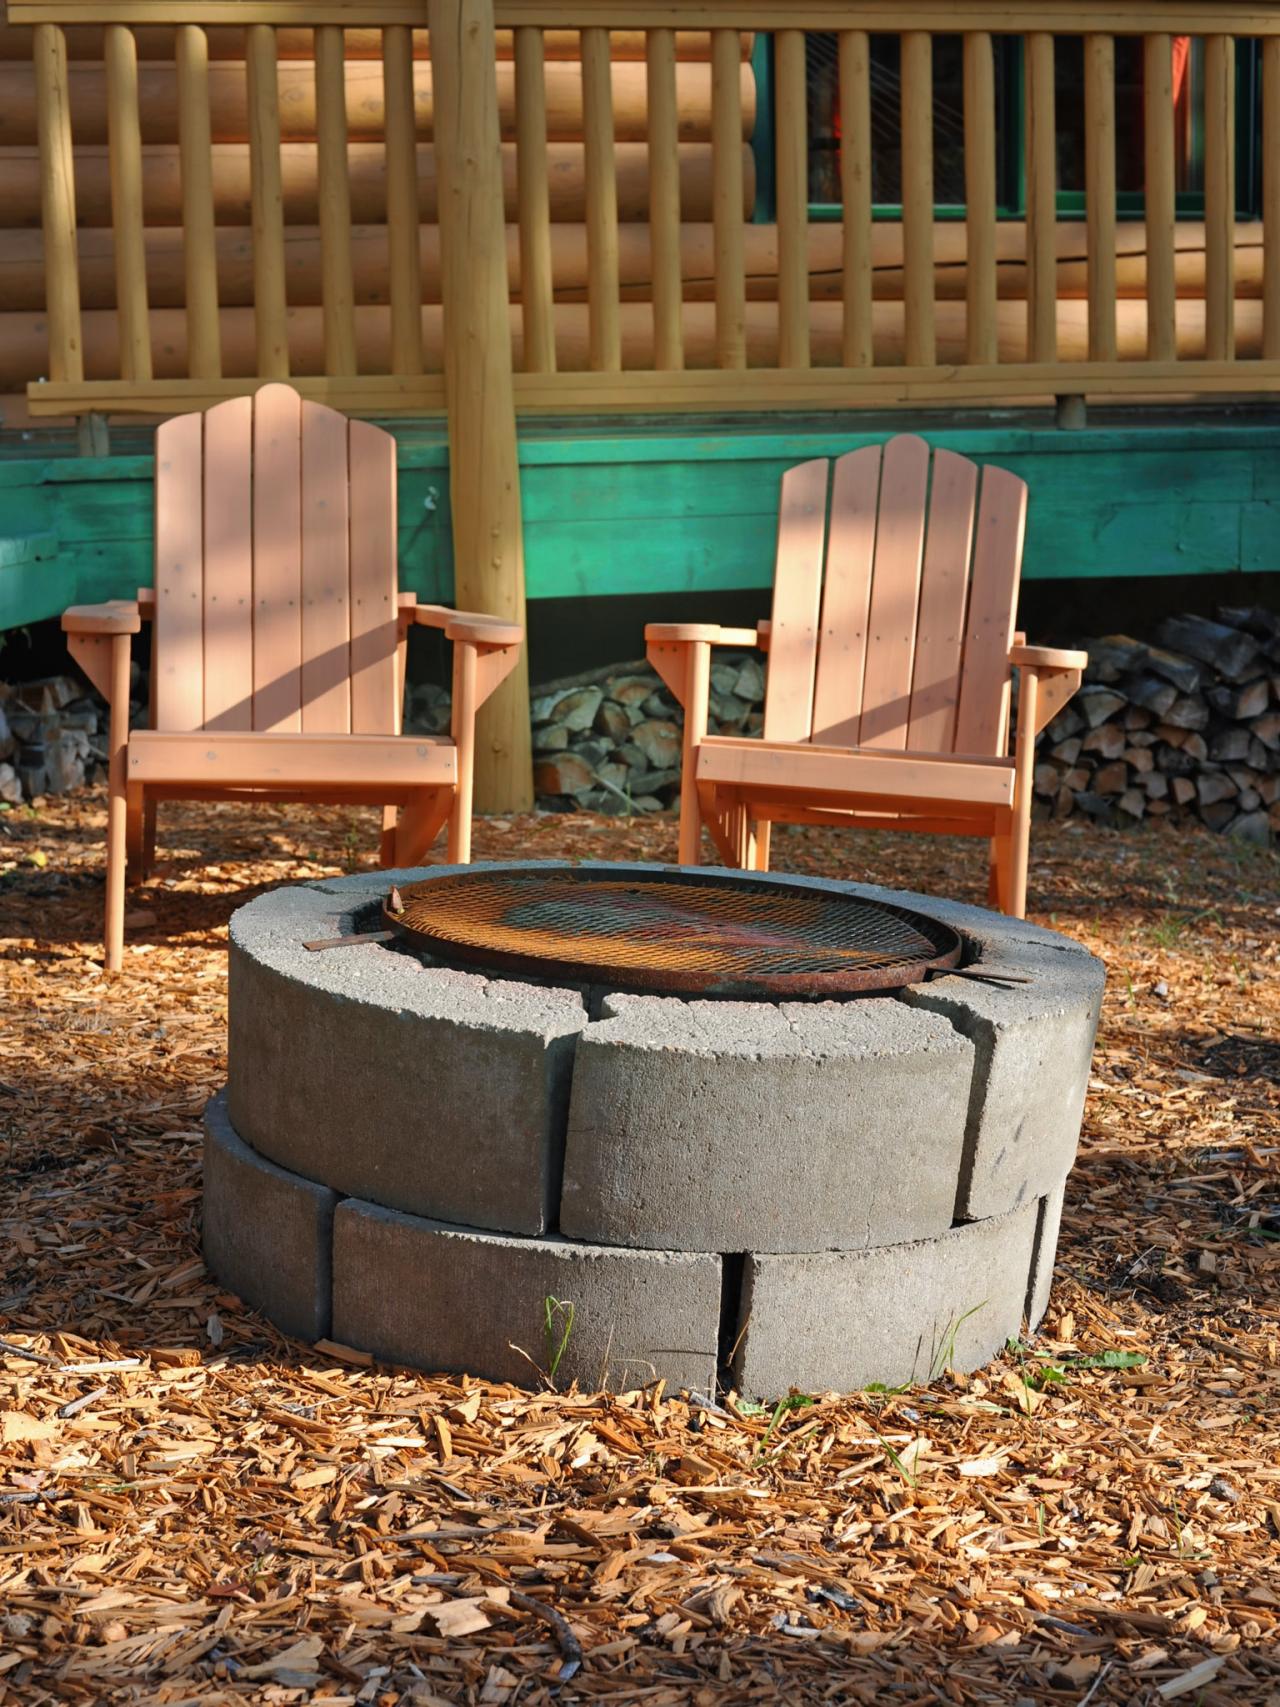 Cinder Block Fire Pits Design Ideas, How To Build A Fire Pit Smoker